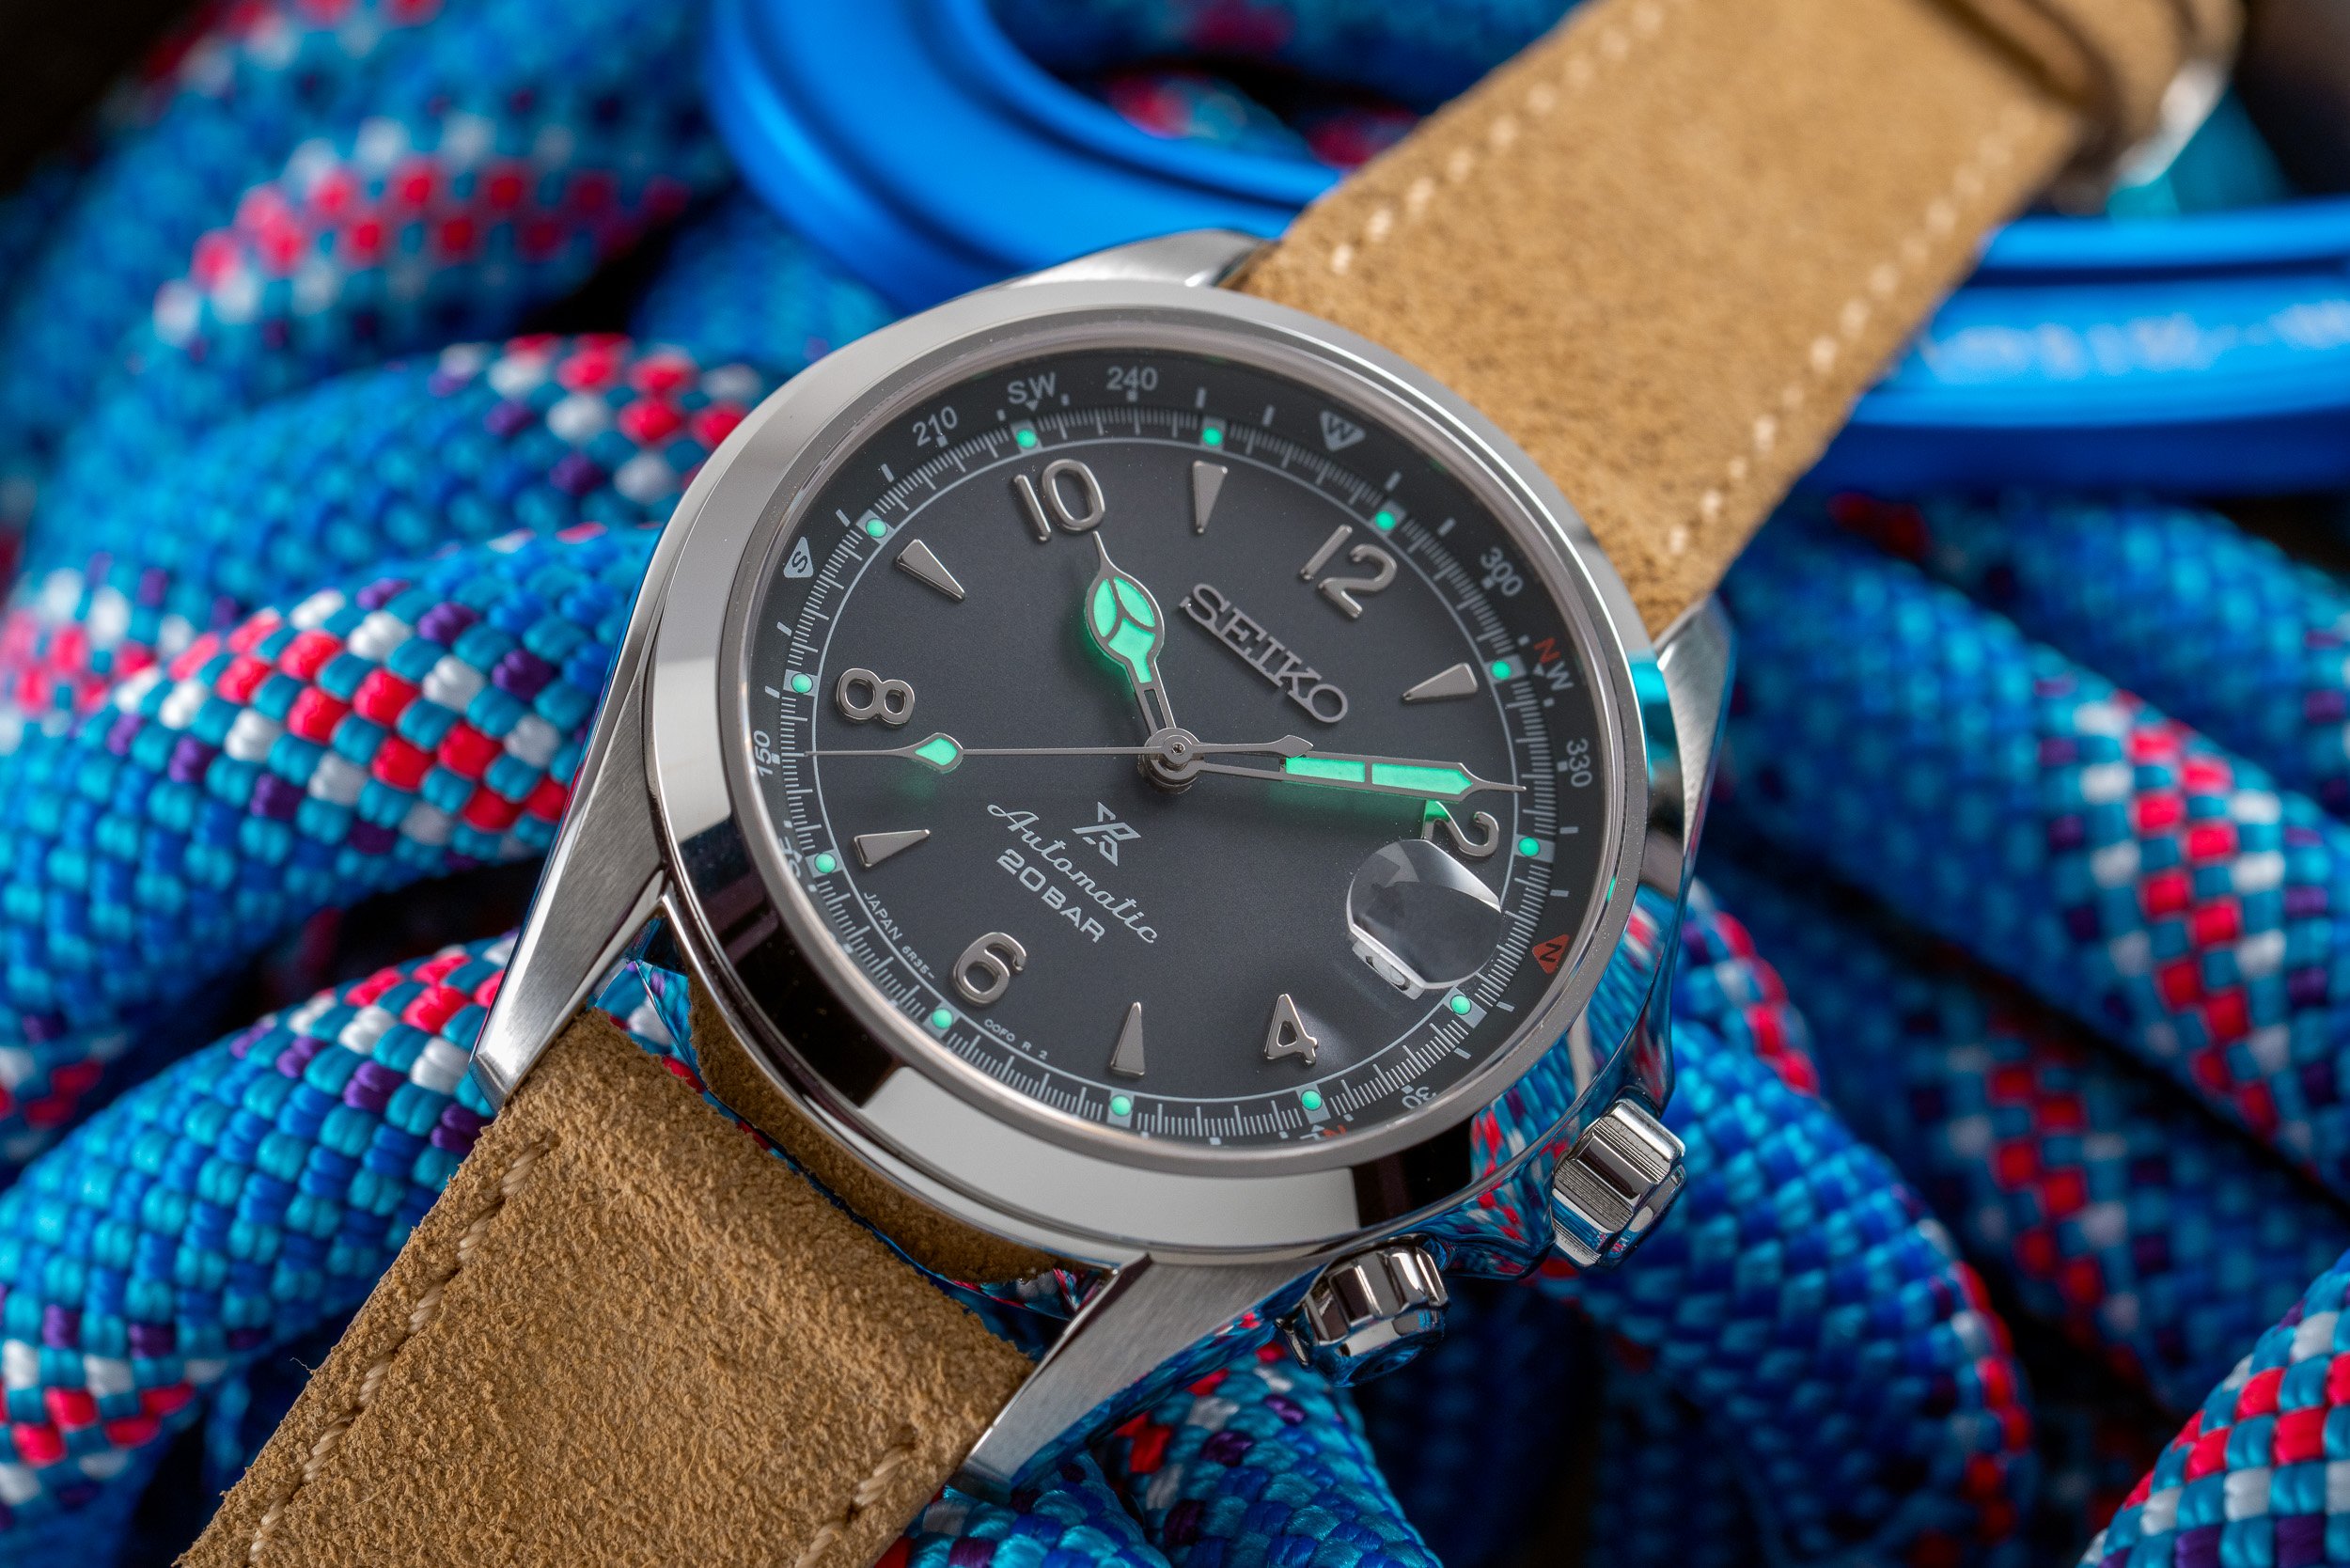 Seiko Alpinist] The watch that started my obsession, inspired from